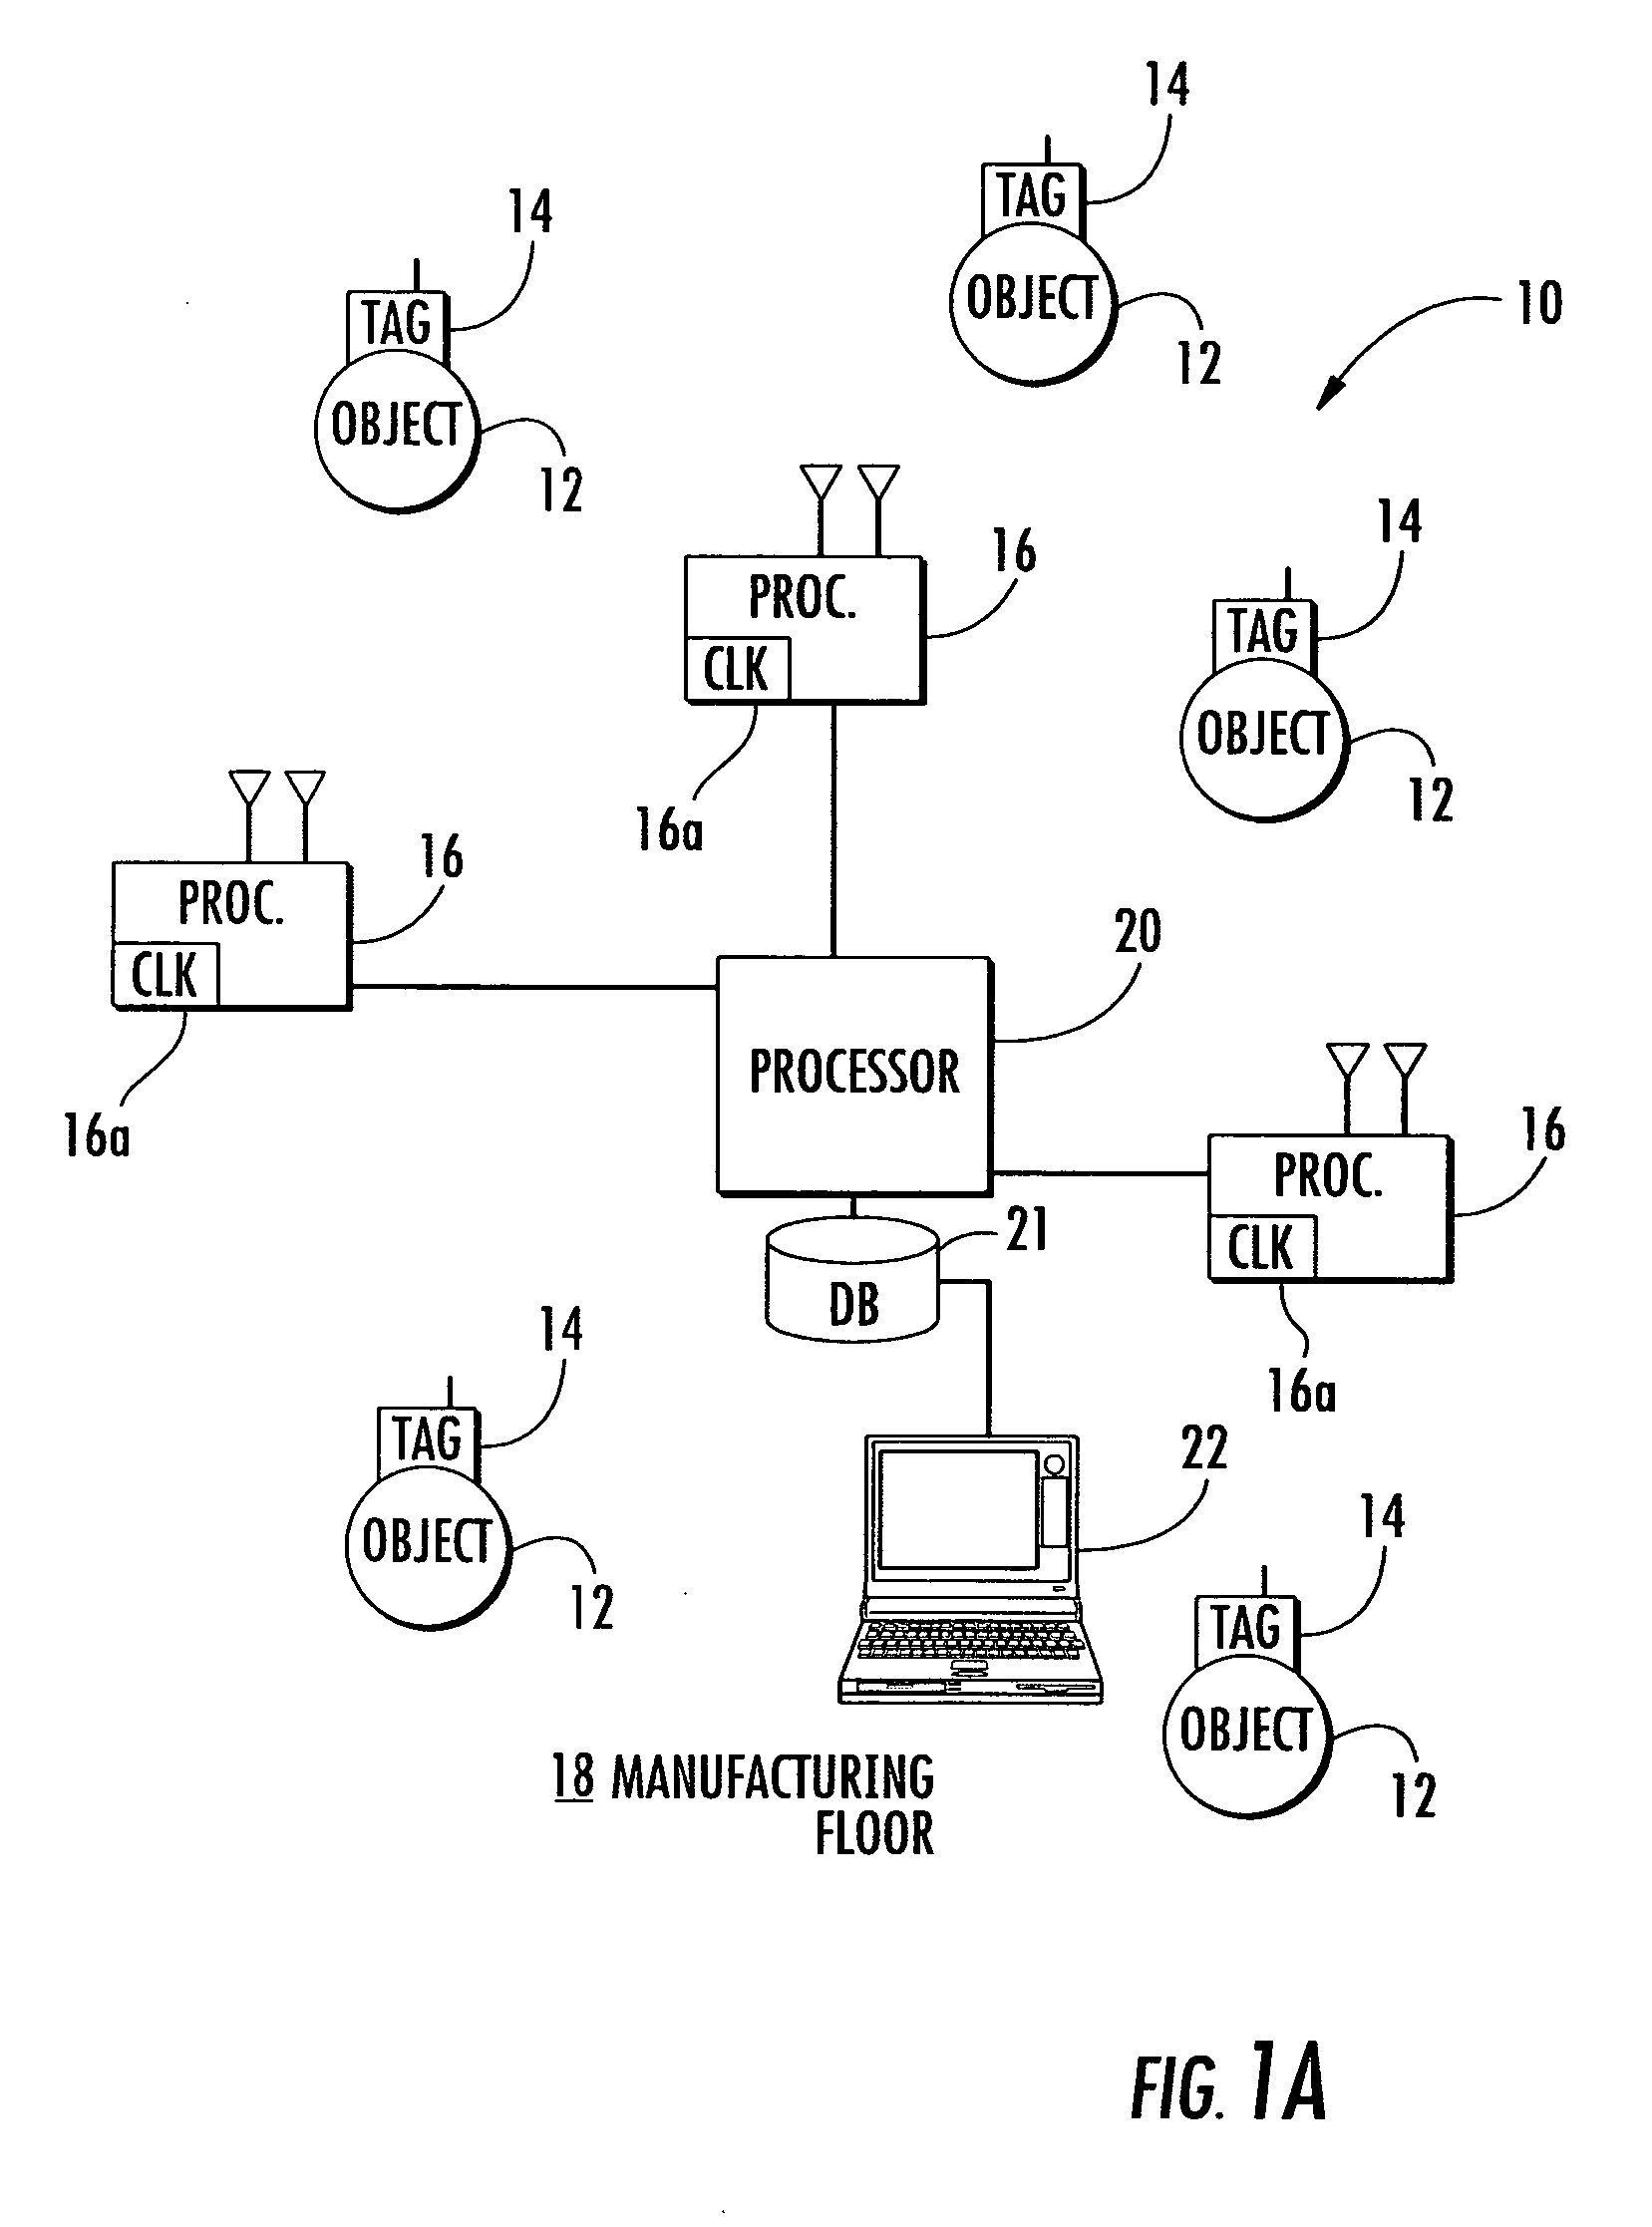 Location system and method that achieves time synchronized network performance using unsynchronized receiver clocks